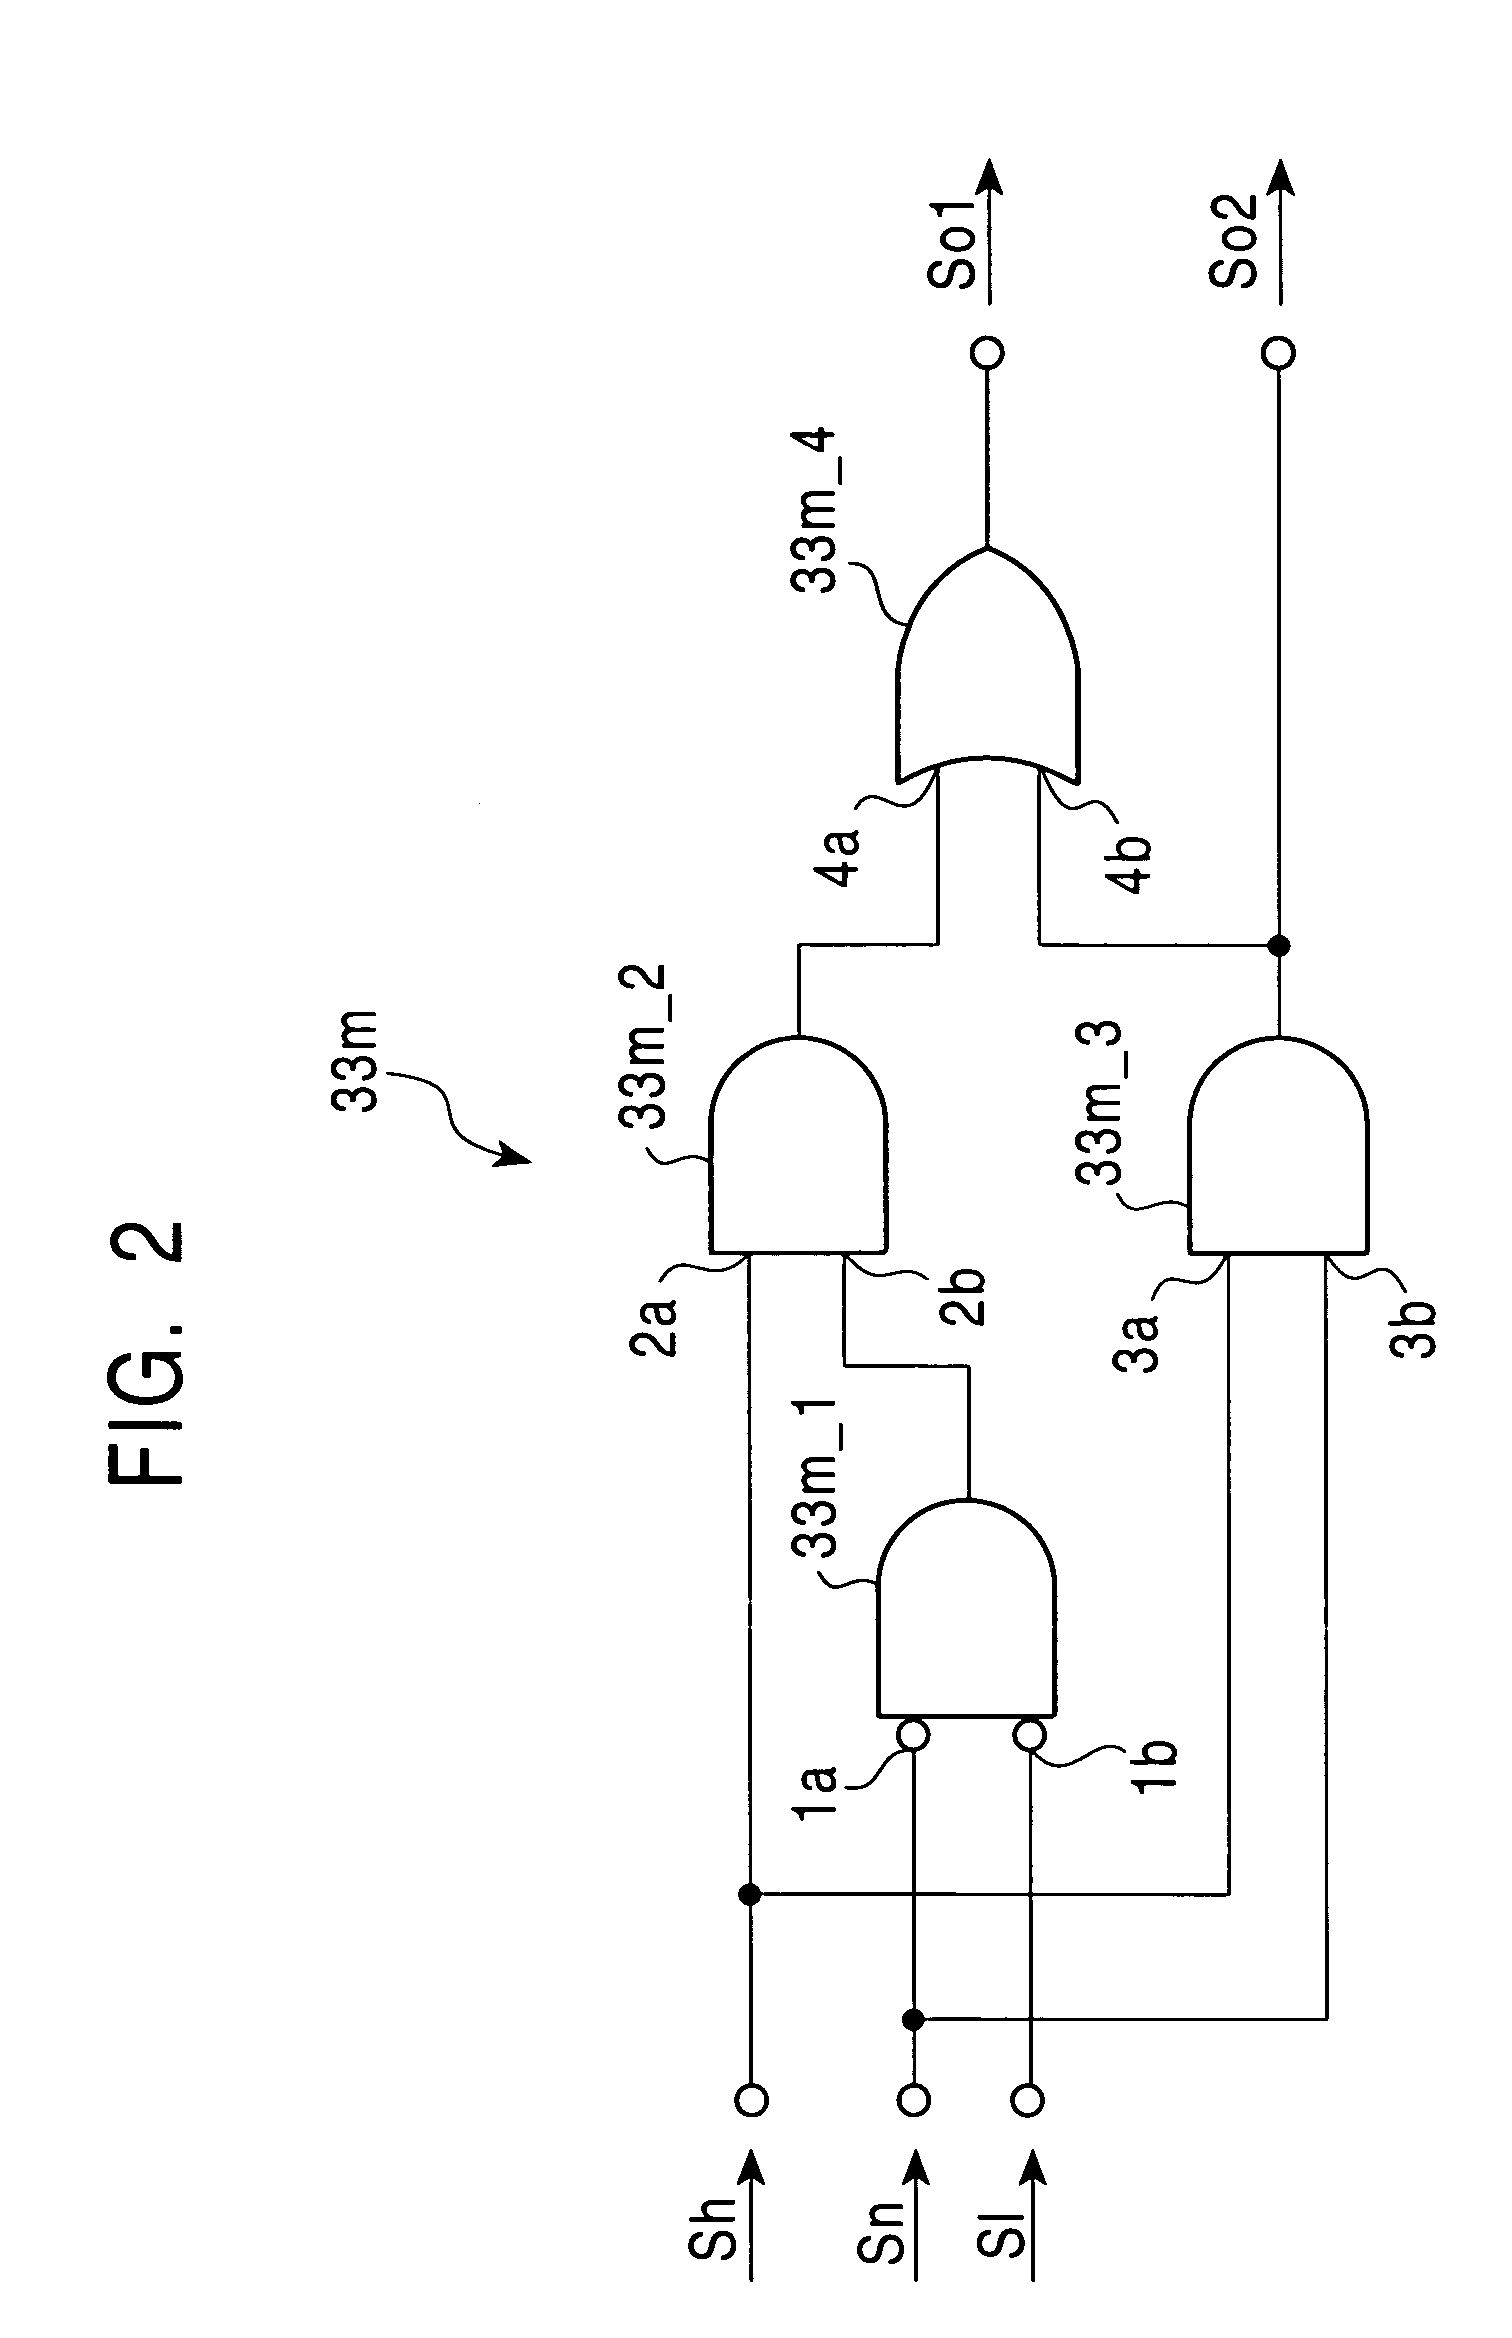 Content addressable memory capable of changing priority in priority encoder